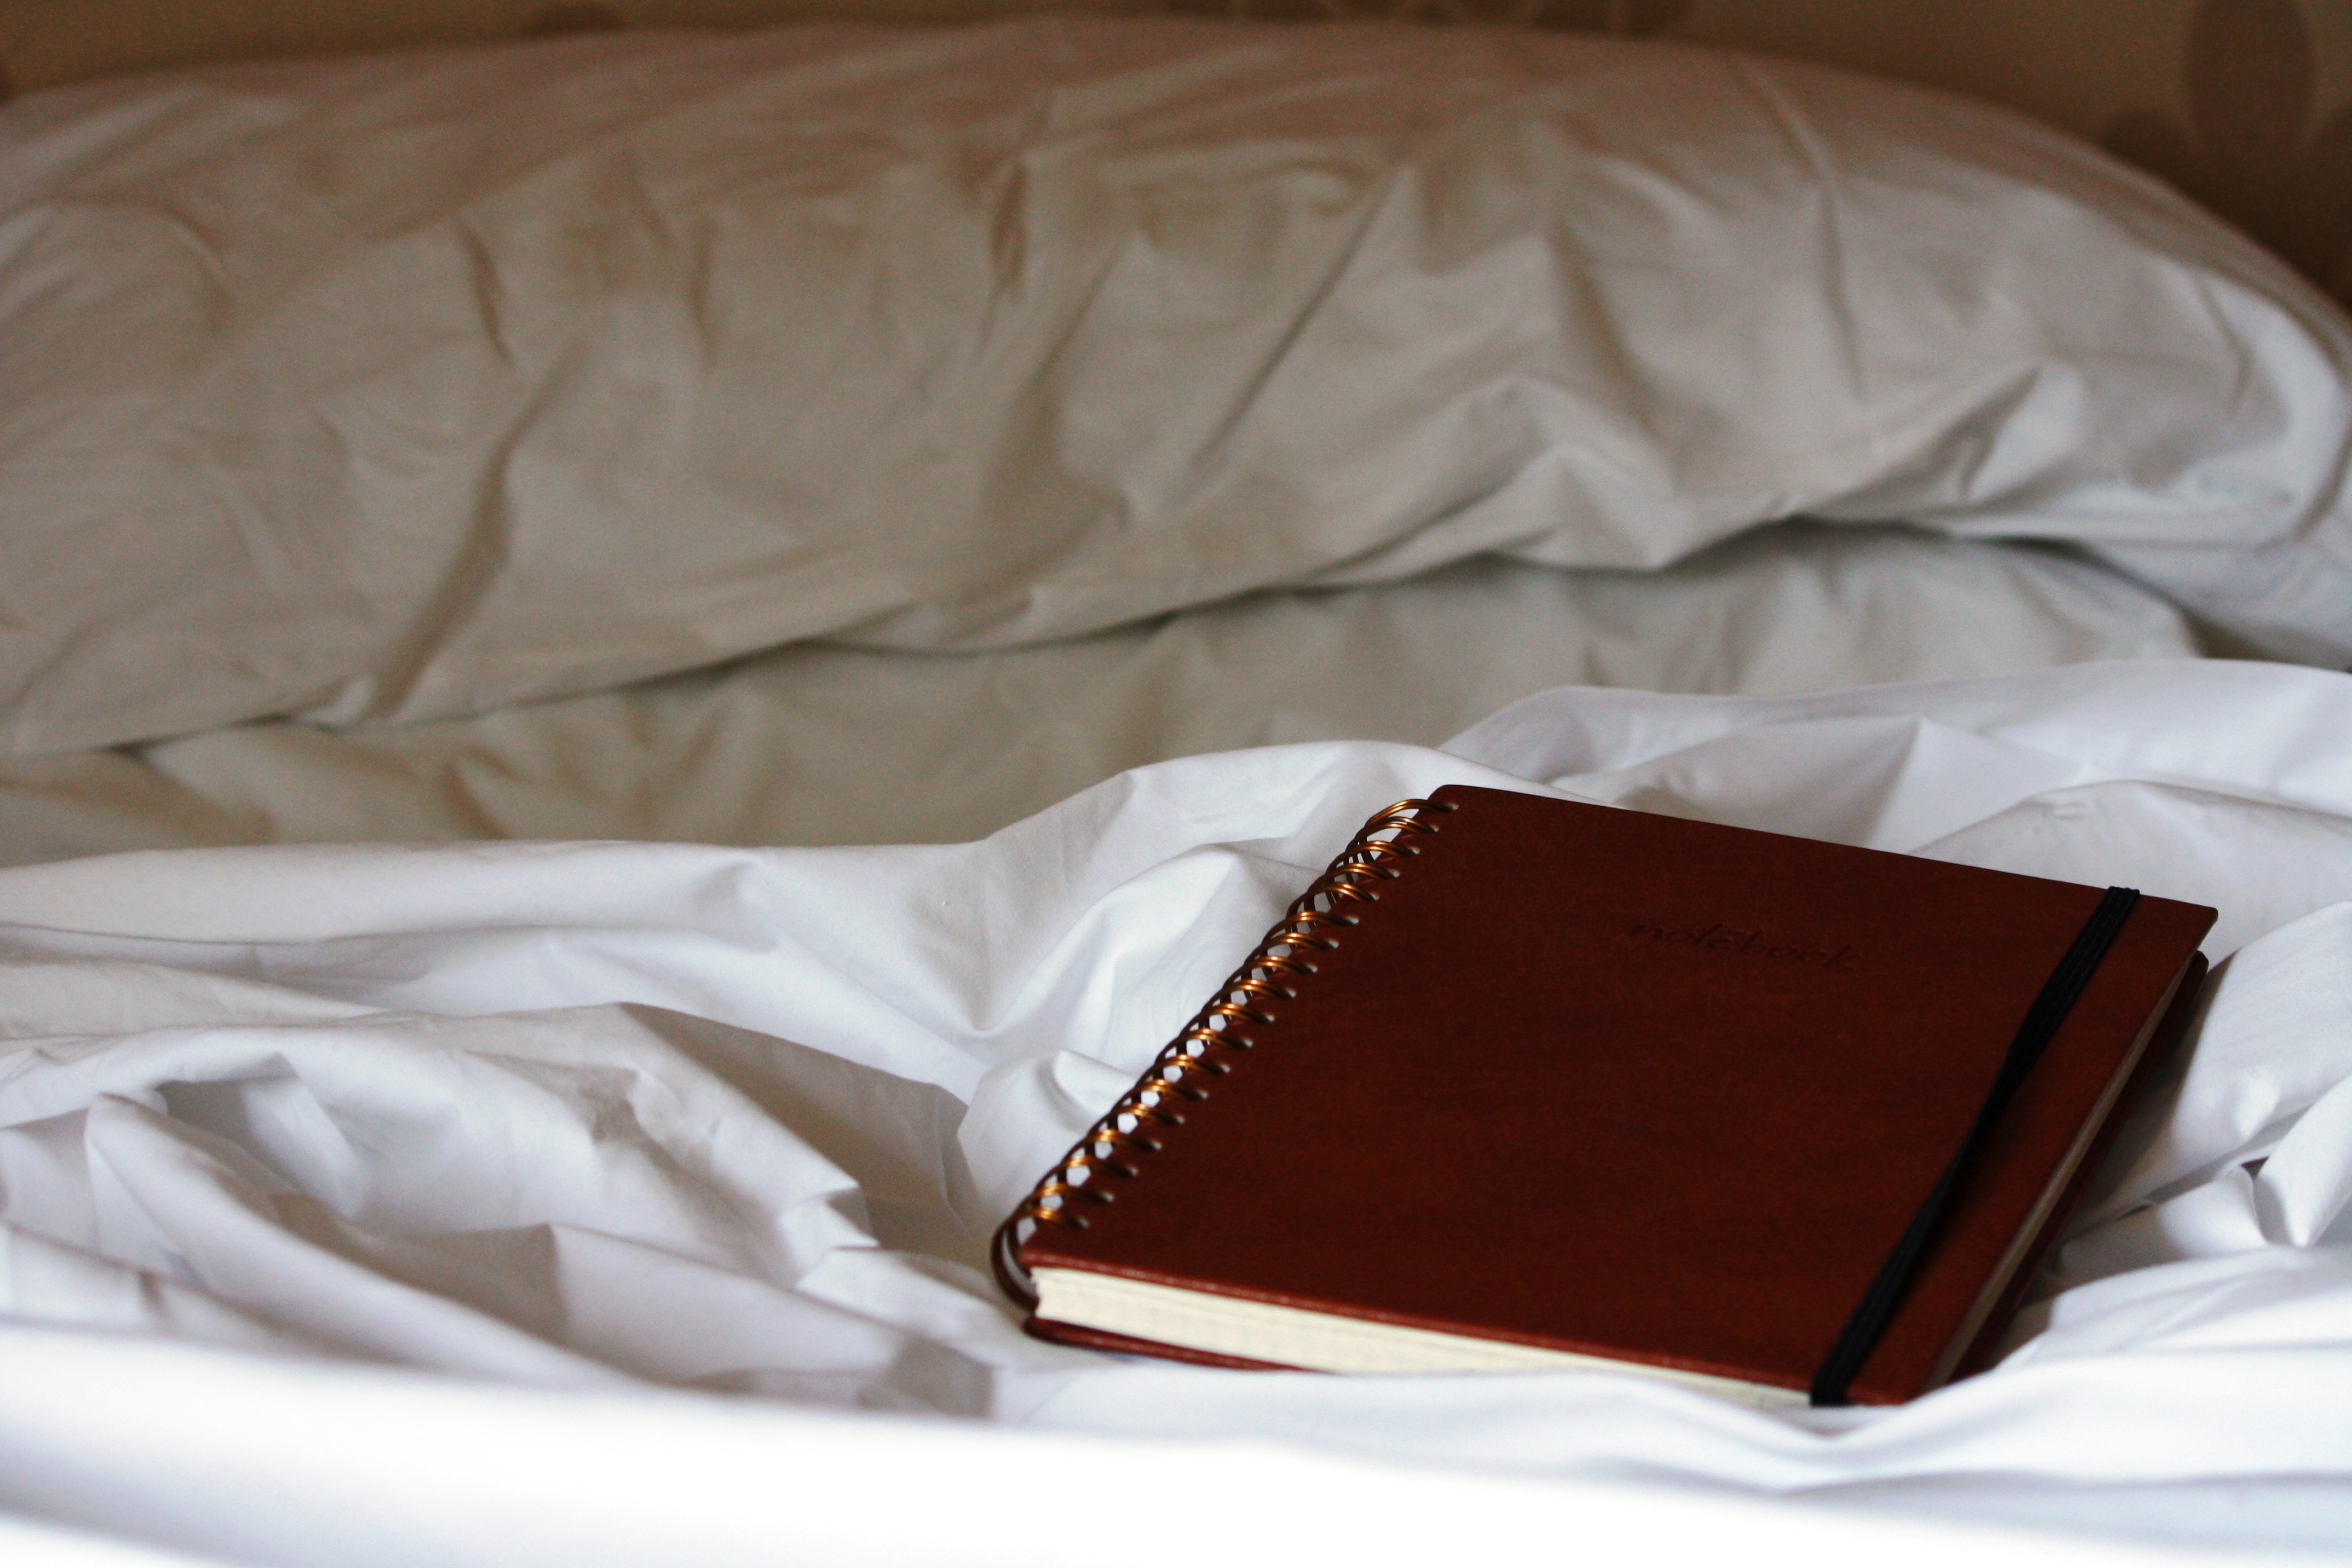 Notebook, Daily, Bed, Thinking, bed, bedroom